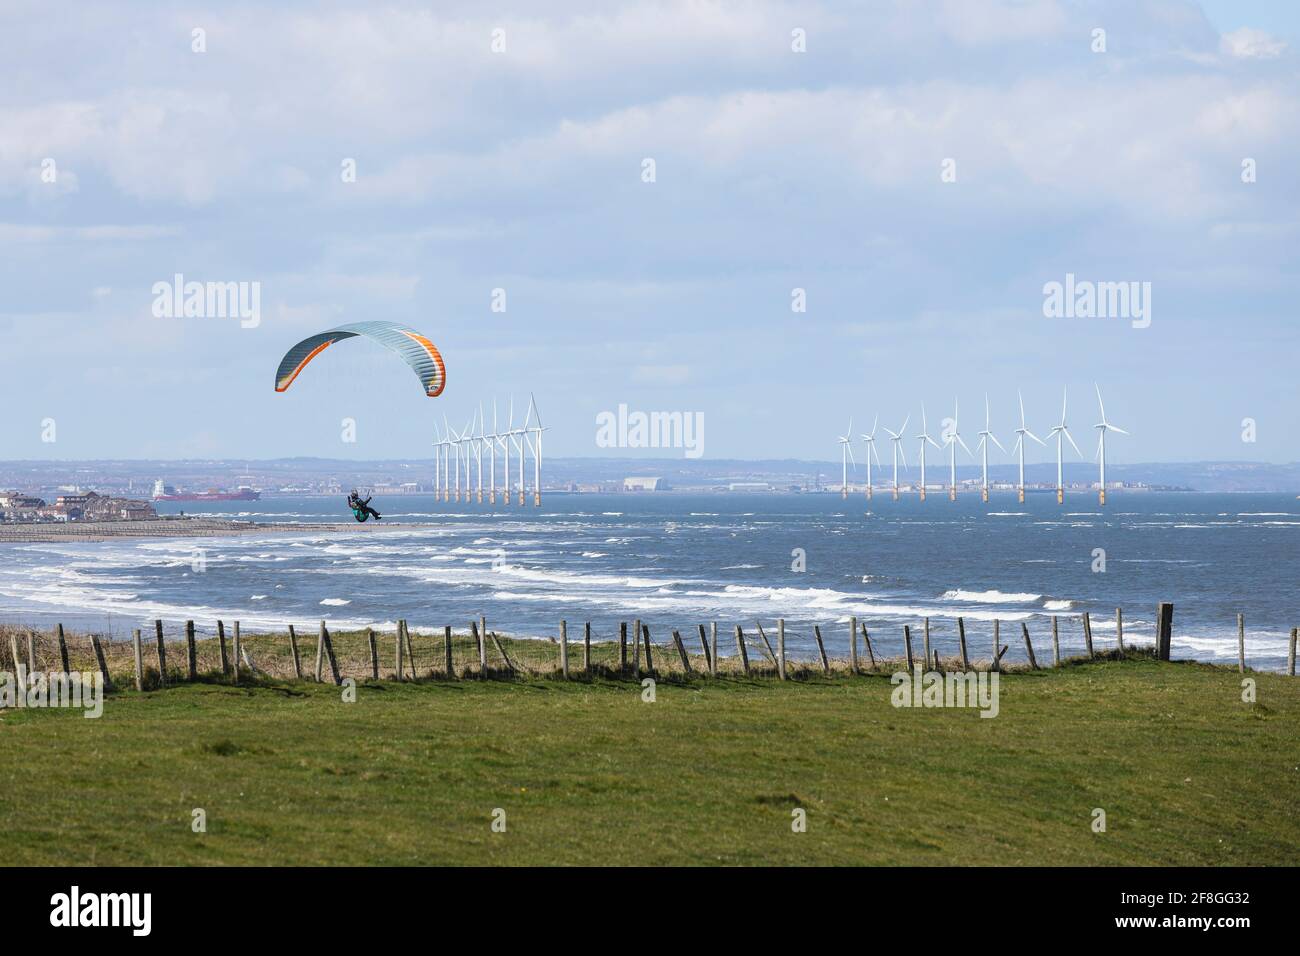 Paraglider with the Teesside Offshore Windfarm Beyond, Redcar, North Yorkshire, UK Stock Photo